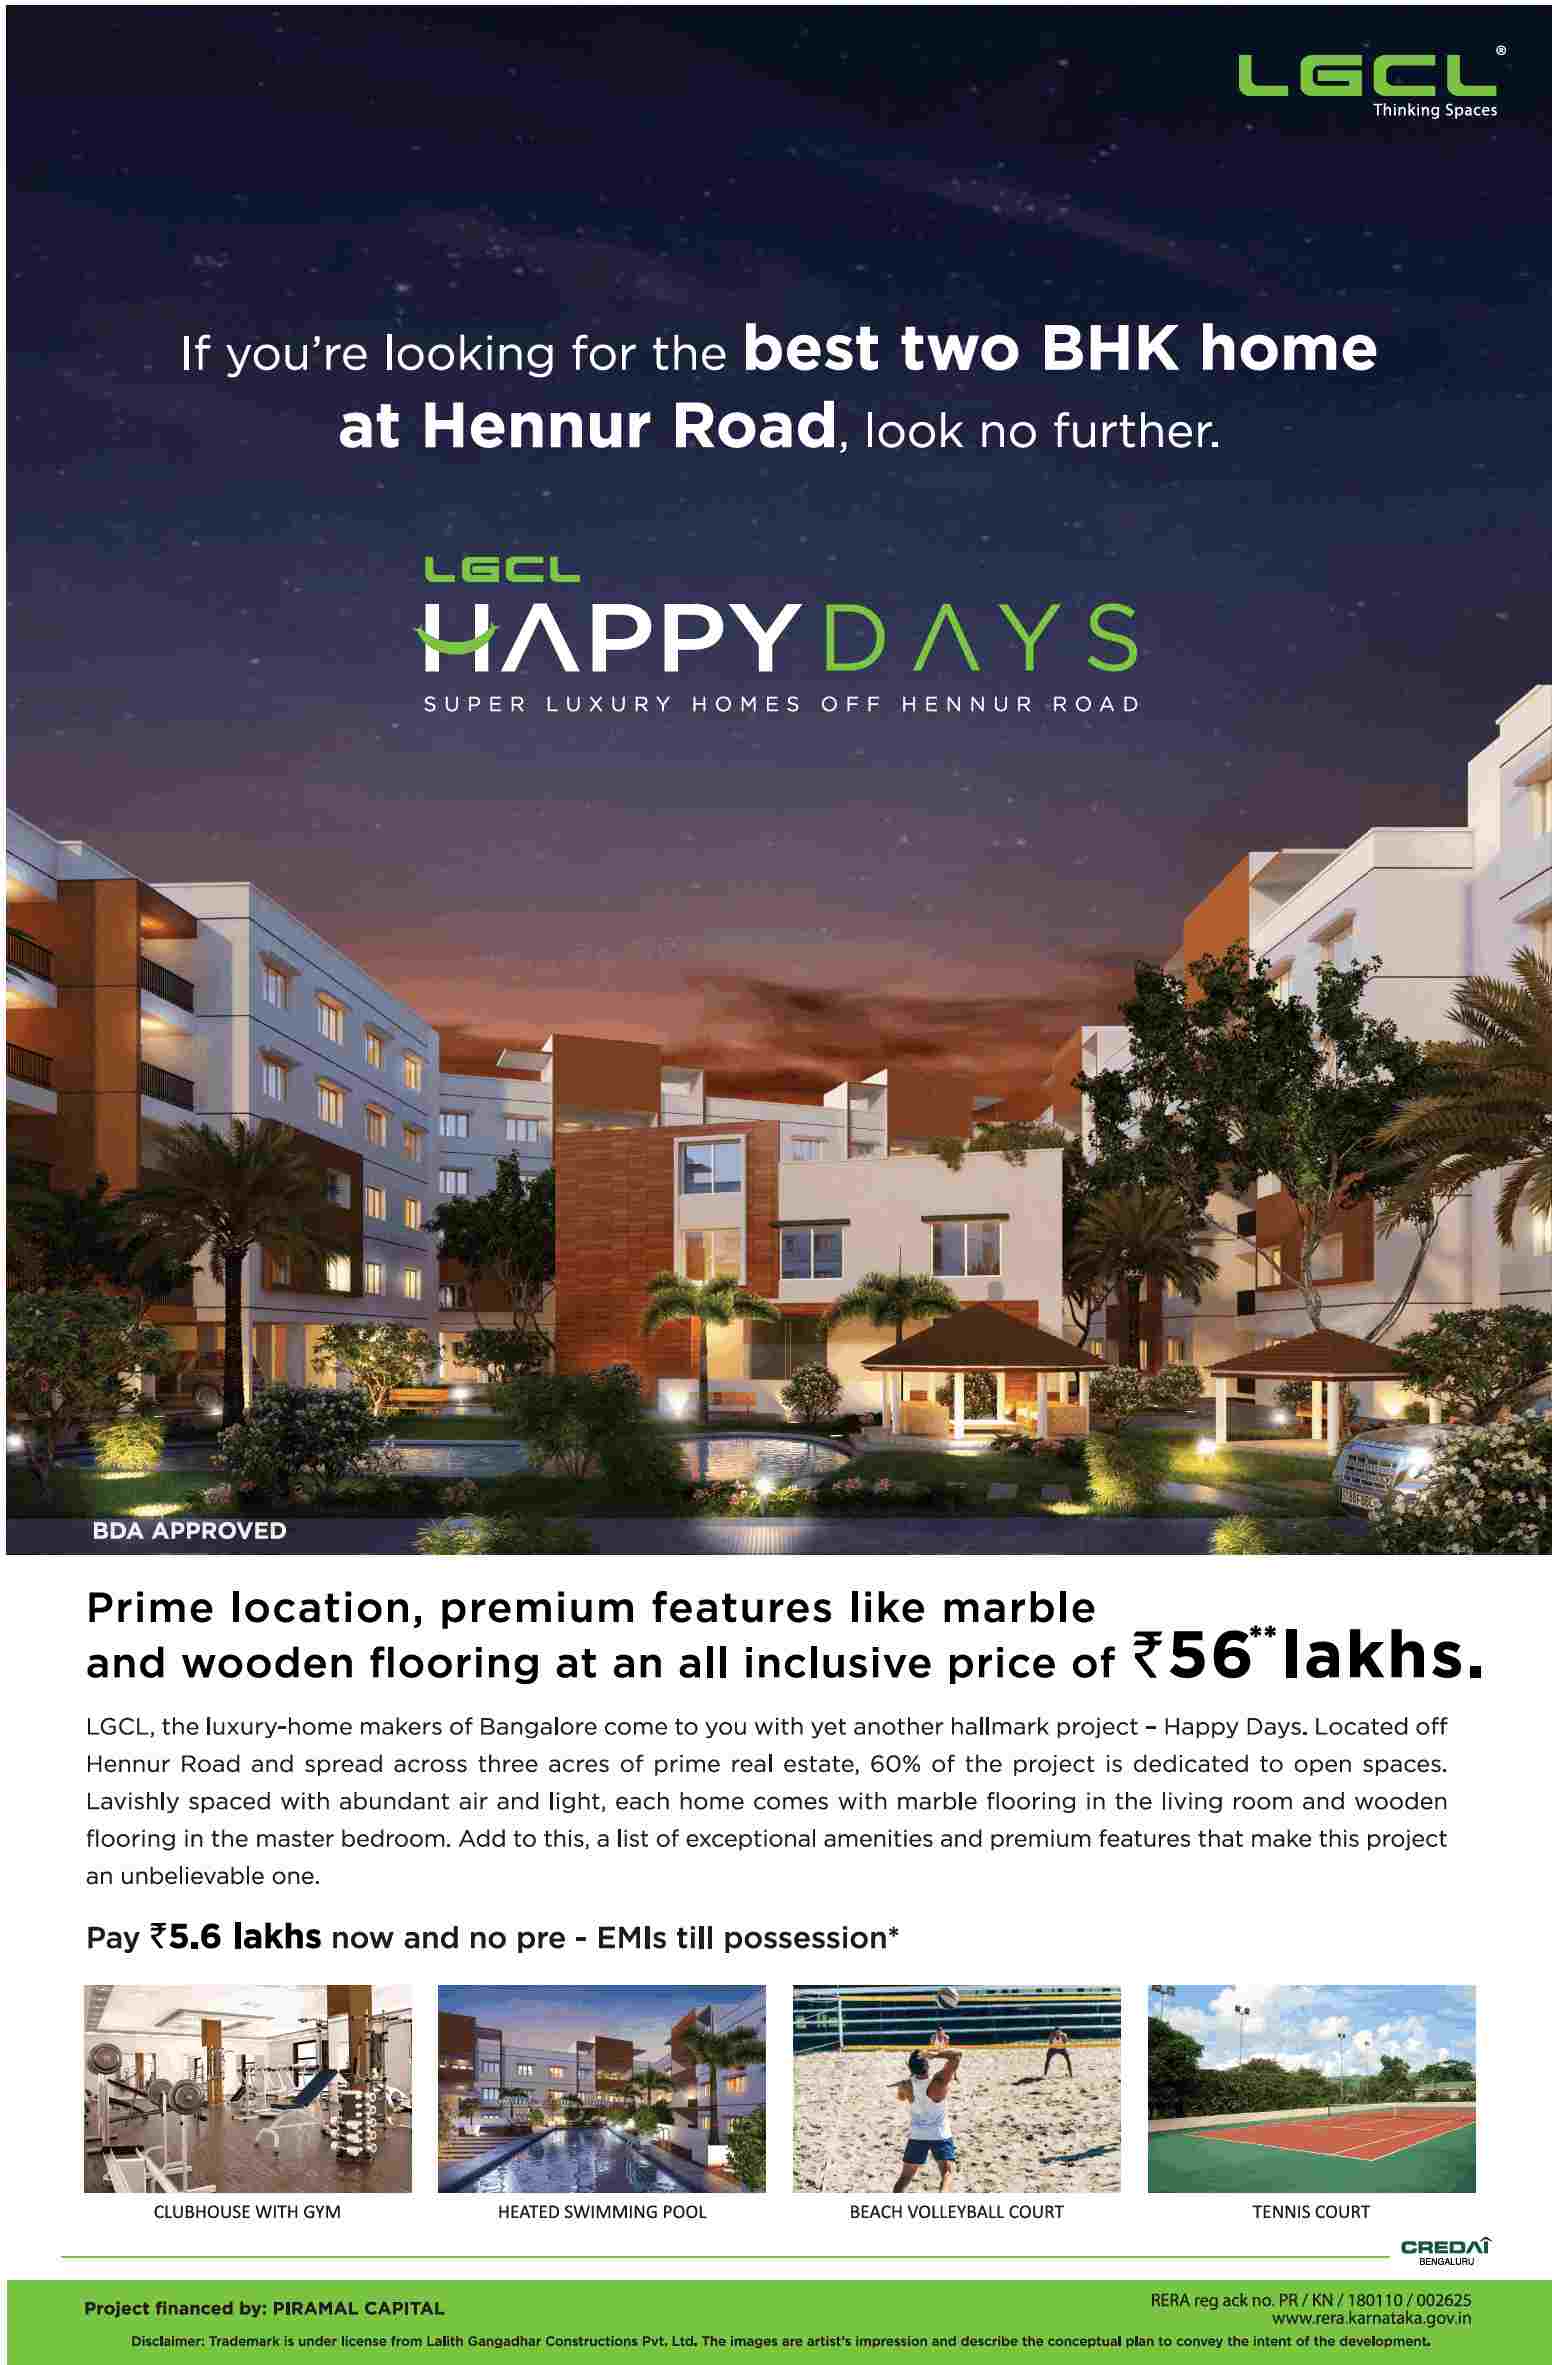 Pay Rs. 5.6 Lakhs now and no pre-EMI till possession at LGCL Happy Days in Bangalore